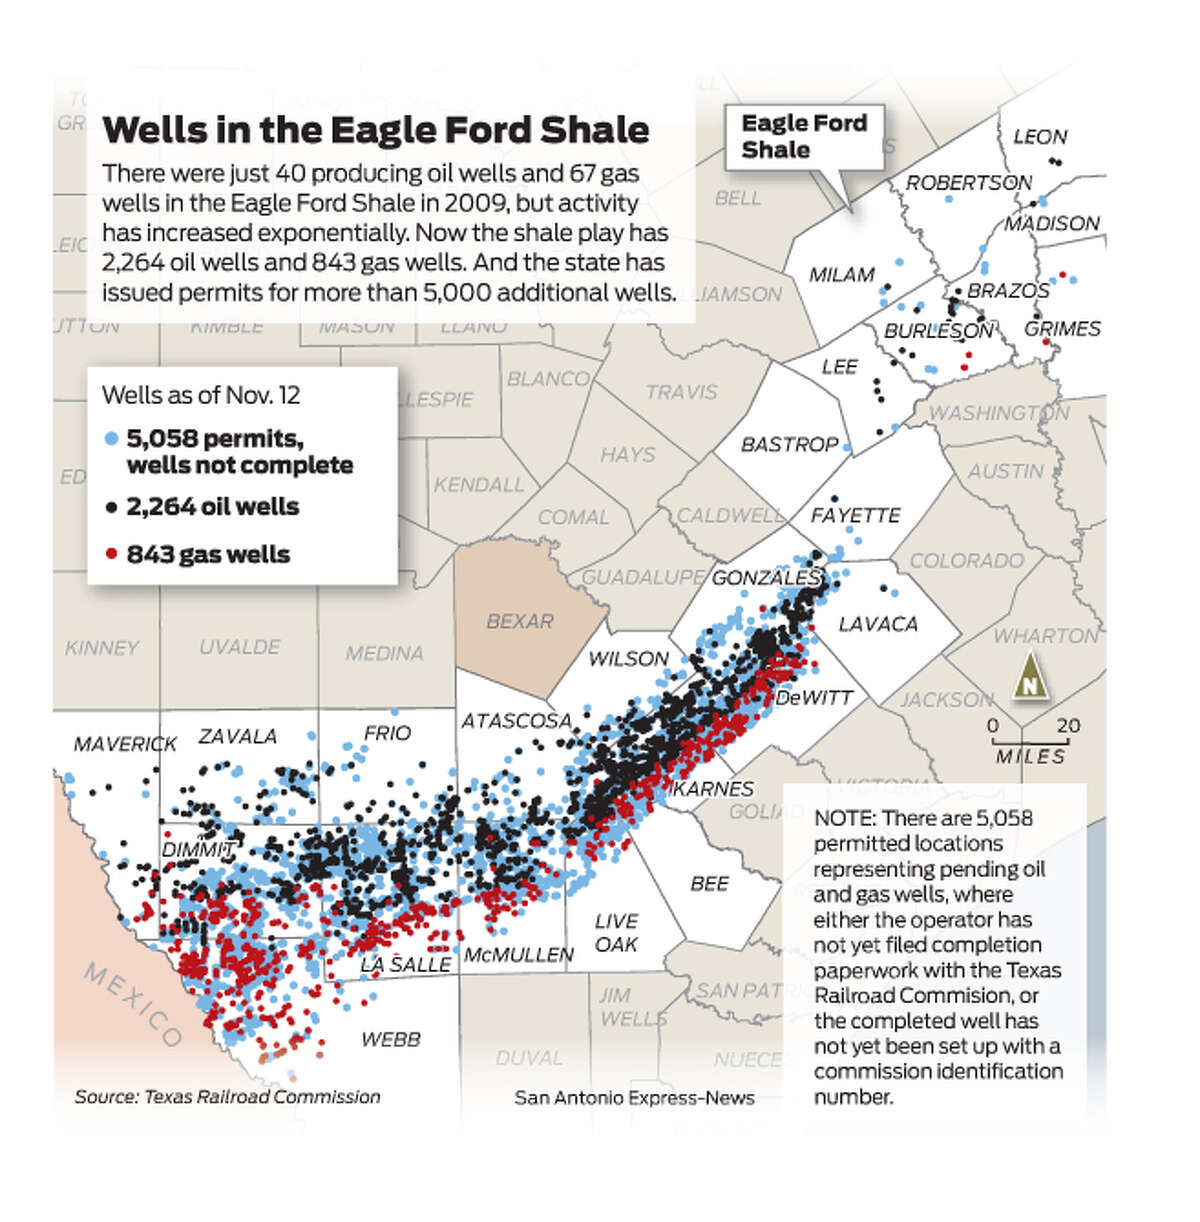 There were just 40 producing oil wells and 67 gas wells in the Eagle Ford Shale in 2009, but activity has increased exponentially. Now the shale play has 2,264 oil wells and 843 gas wells. And the state has issued permits for more than 5,000 additional wells.